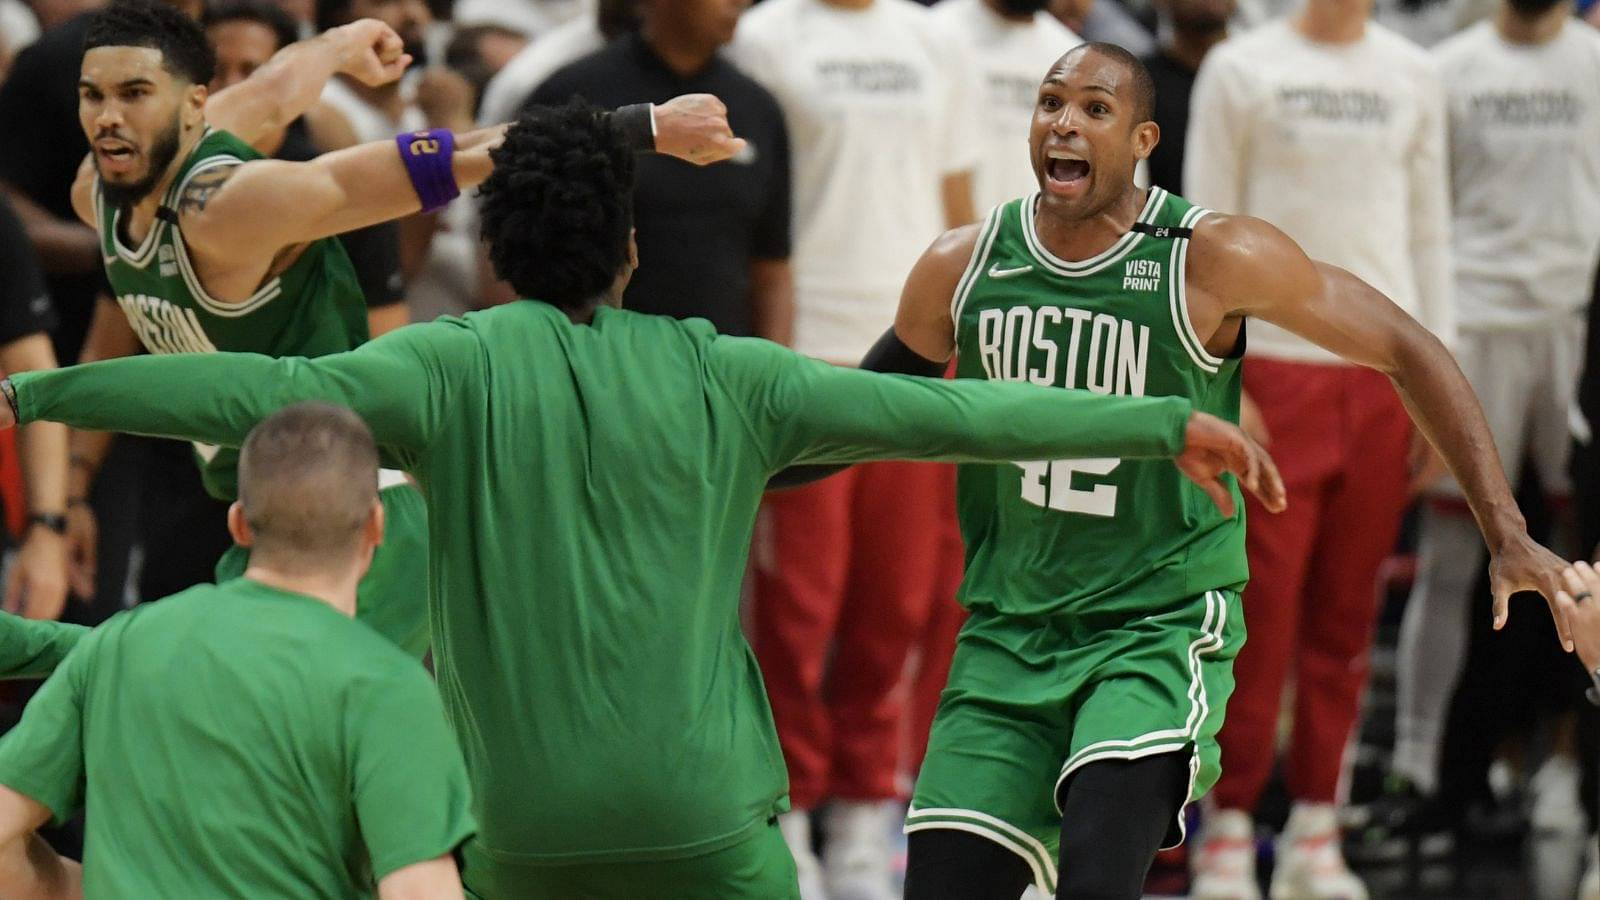 “Al Horford is the best teammate ever, the ultimate professional... he just wants to win”: Jayson Tatum has nothing for the Celtics Big but compliments and respect like everyone in Boston